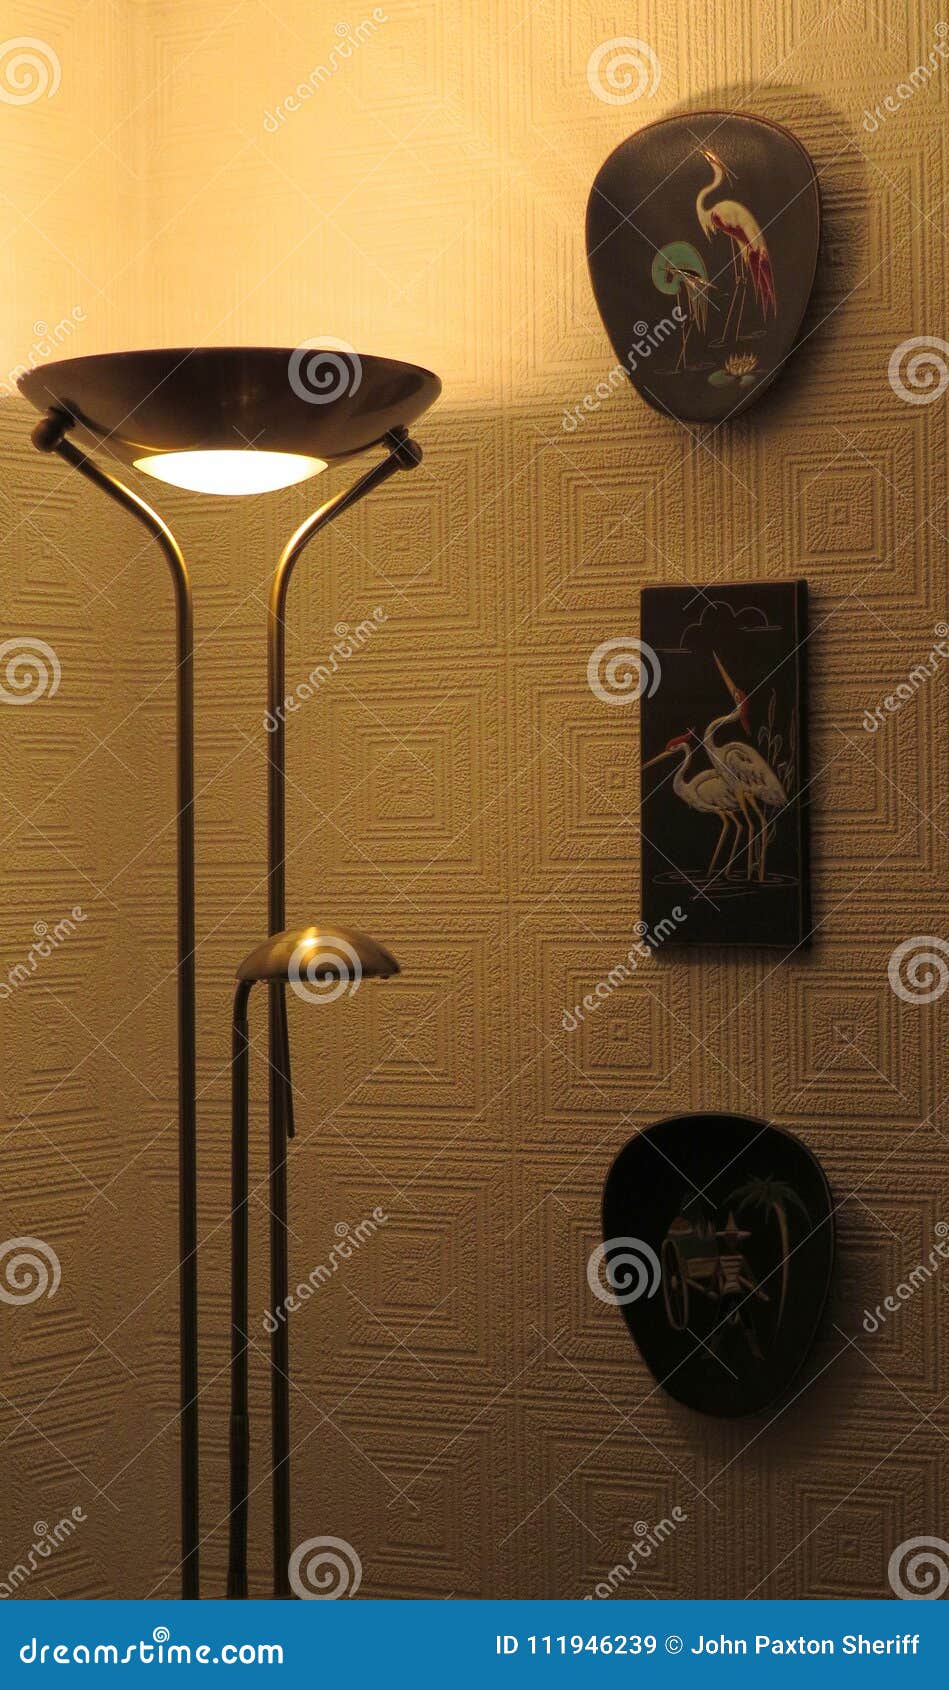 Room Corner With Uplighter And Wall Plaques Stock Image